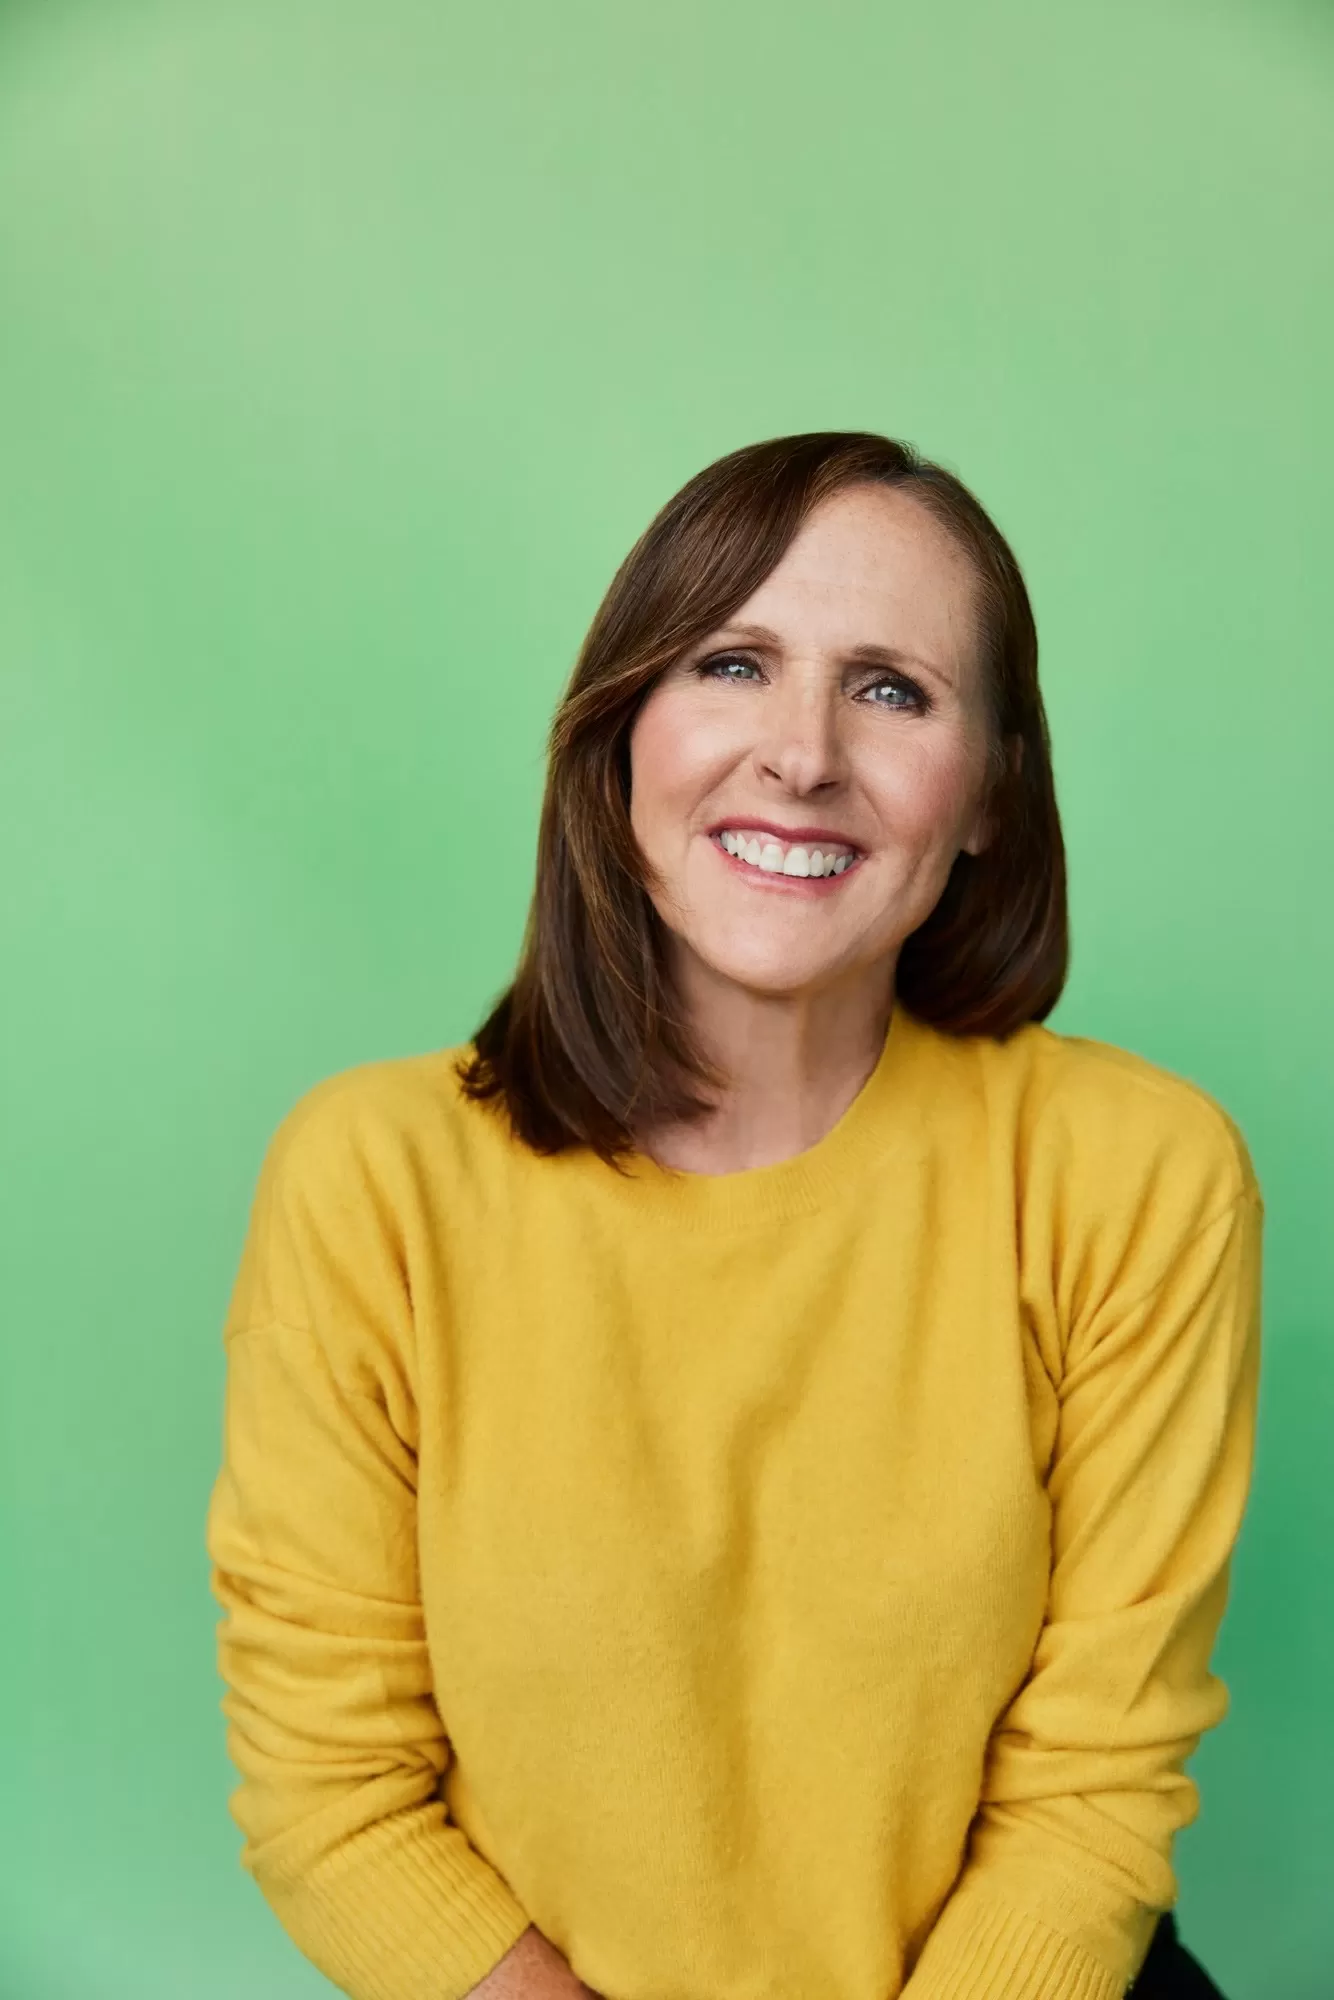 AN EVENING WITH...MOLLY SHANNON